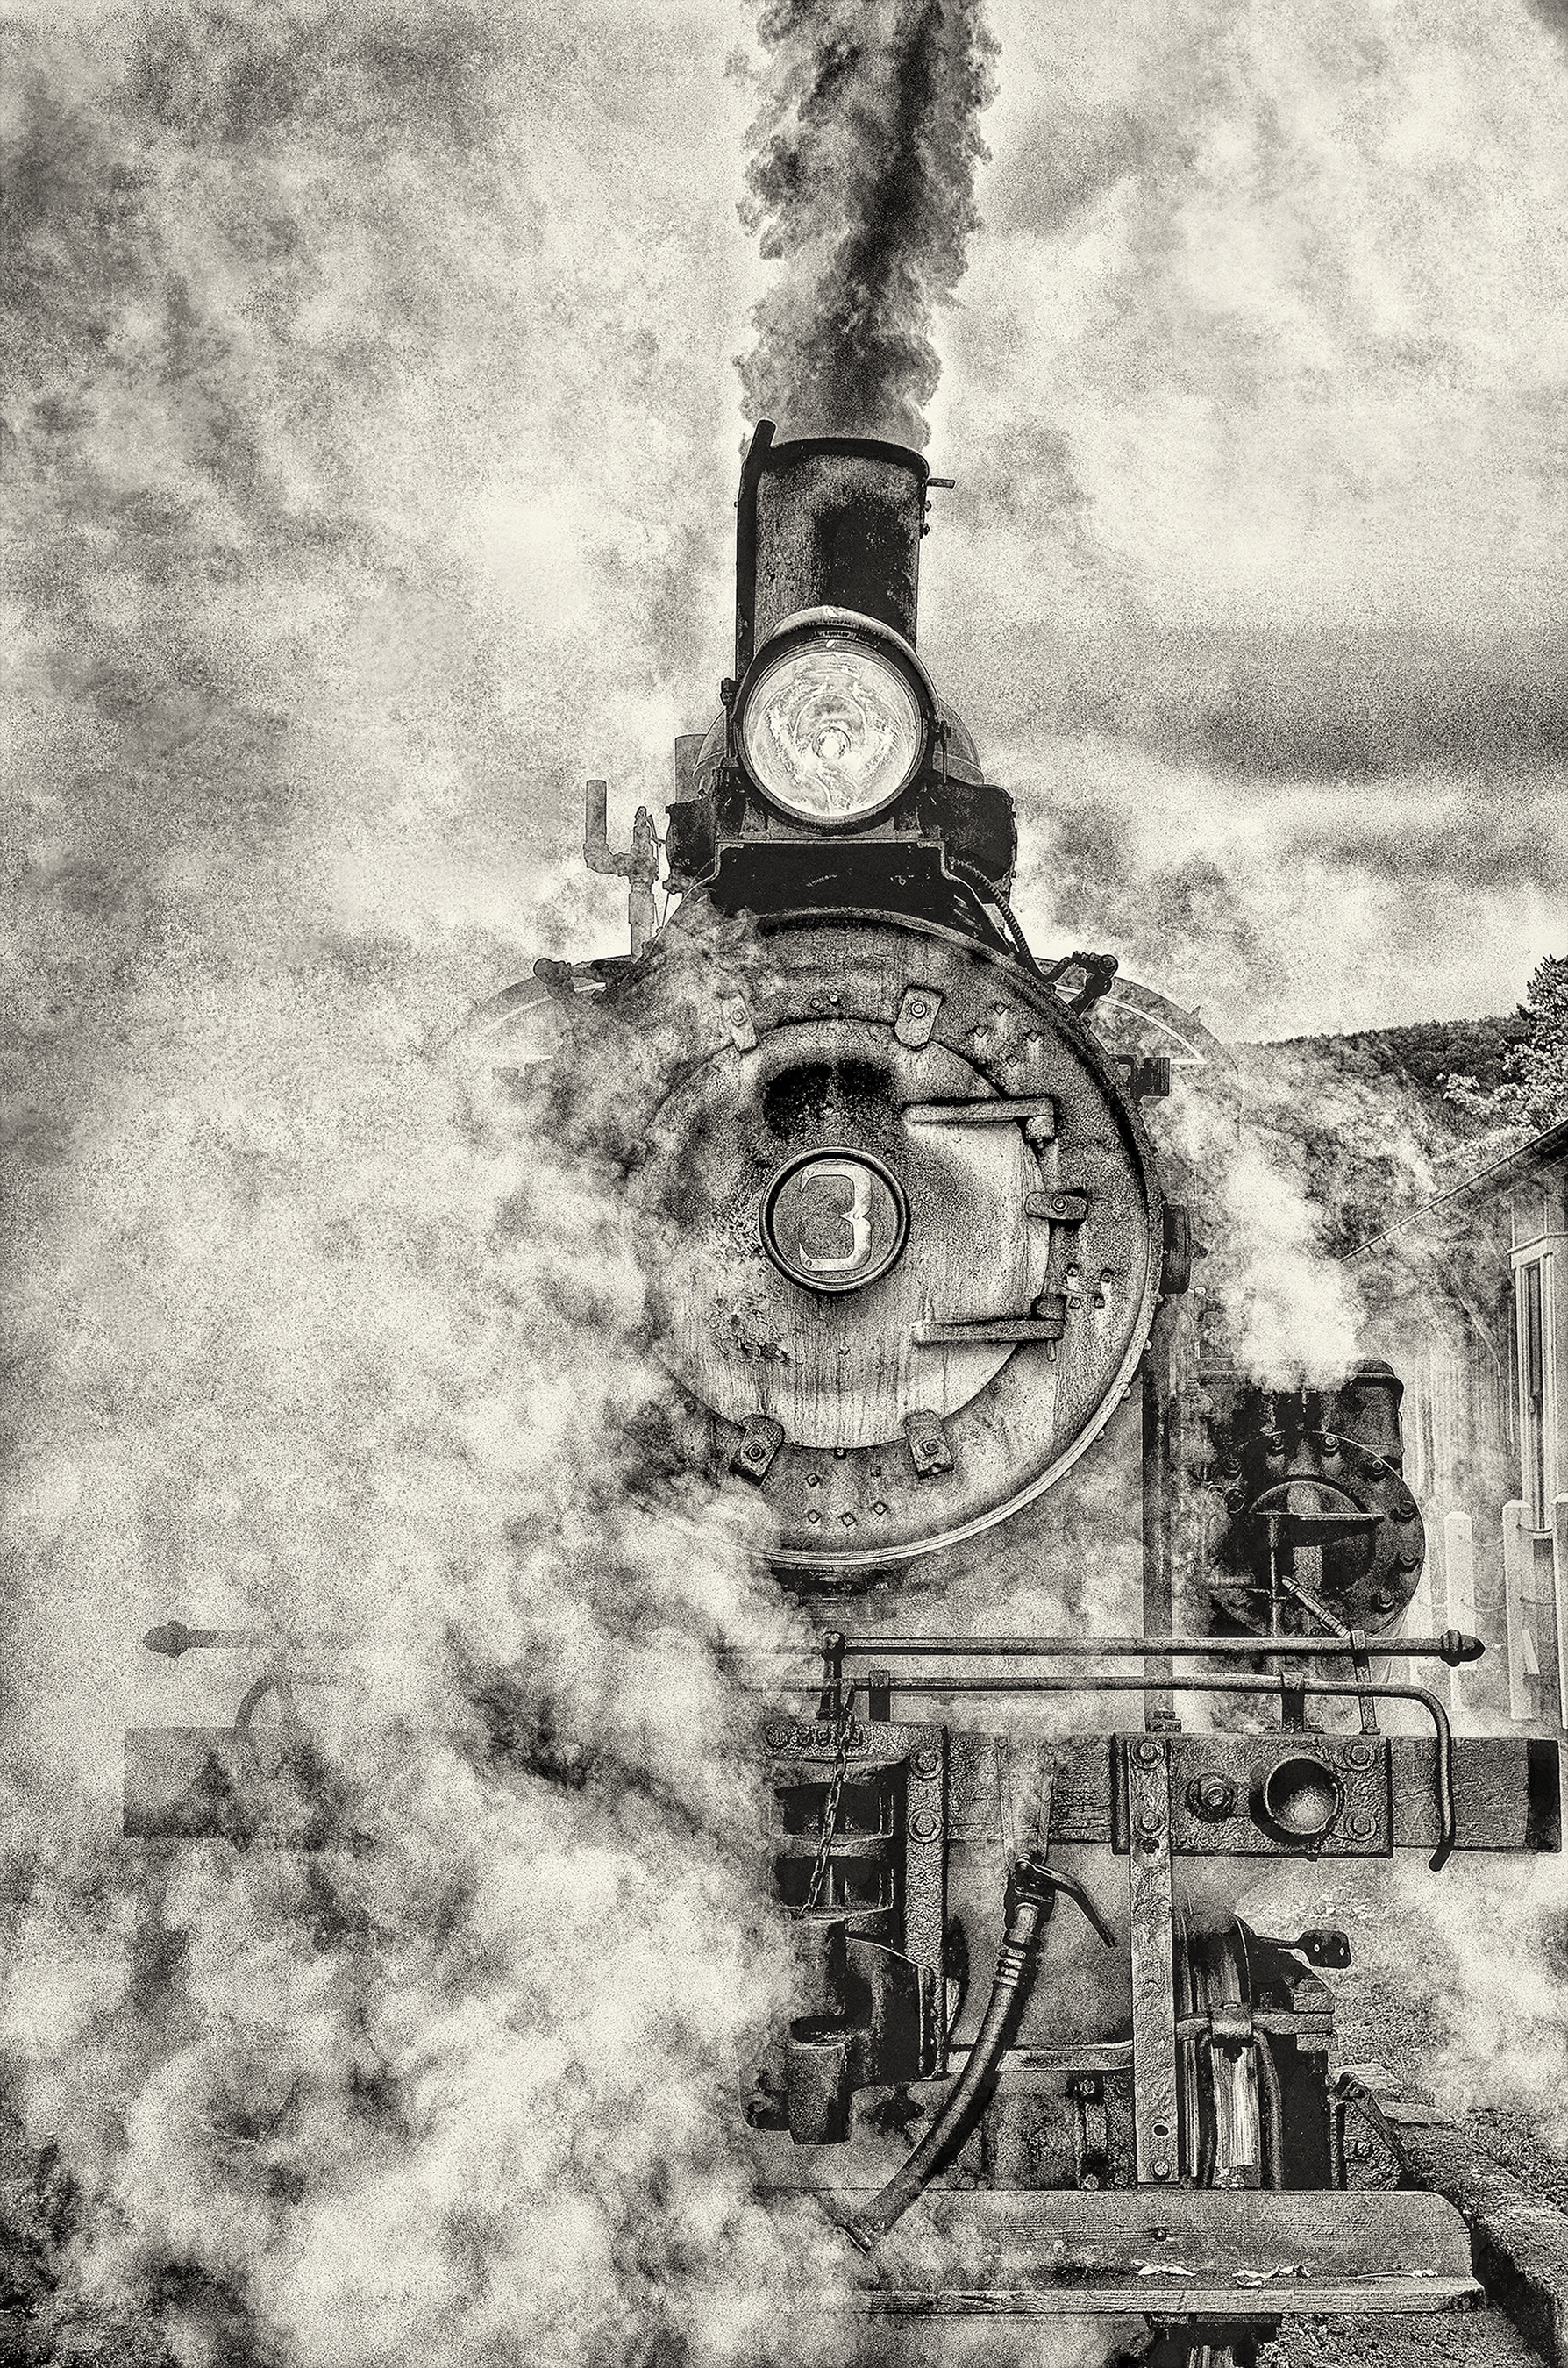 Member's Choice Award:  Jennifer Cardinell "Last of the Climax Steam Engines"